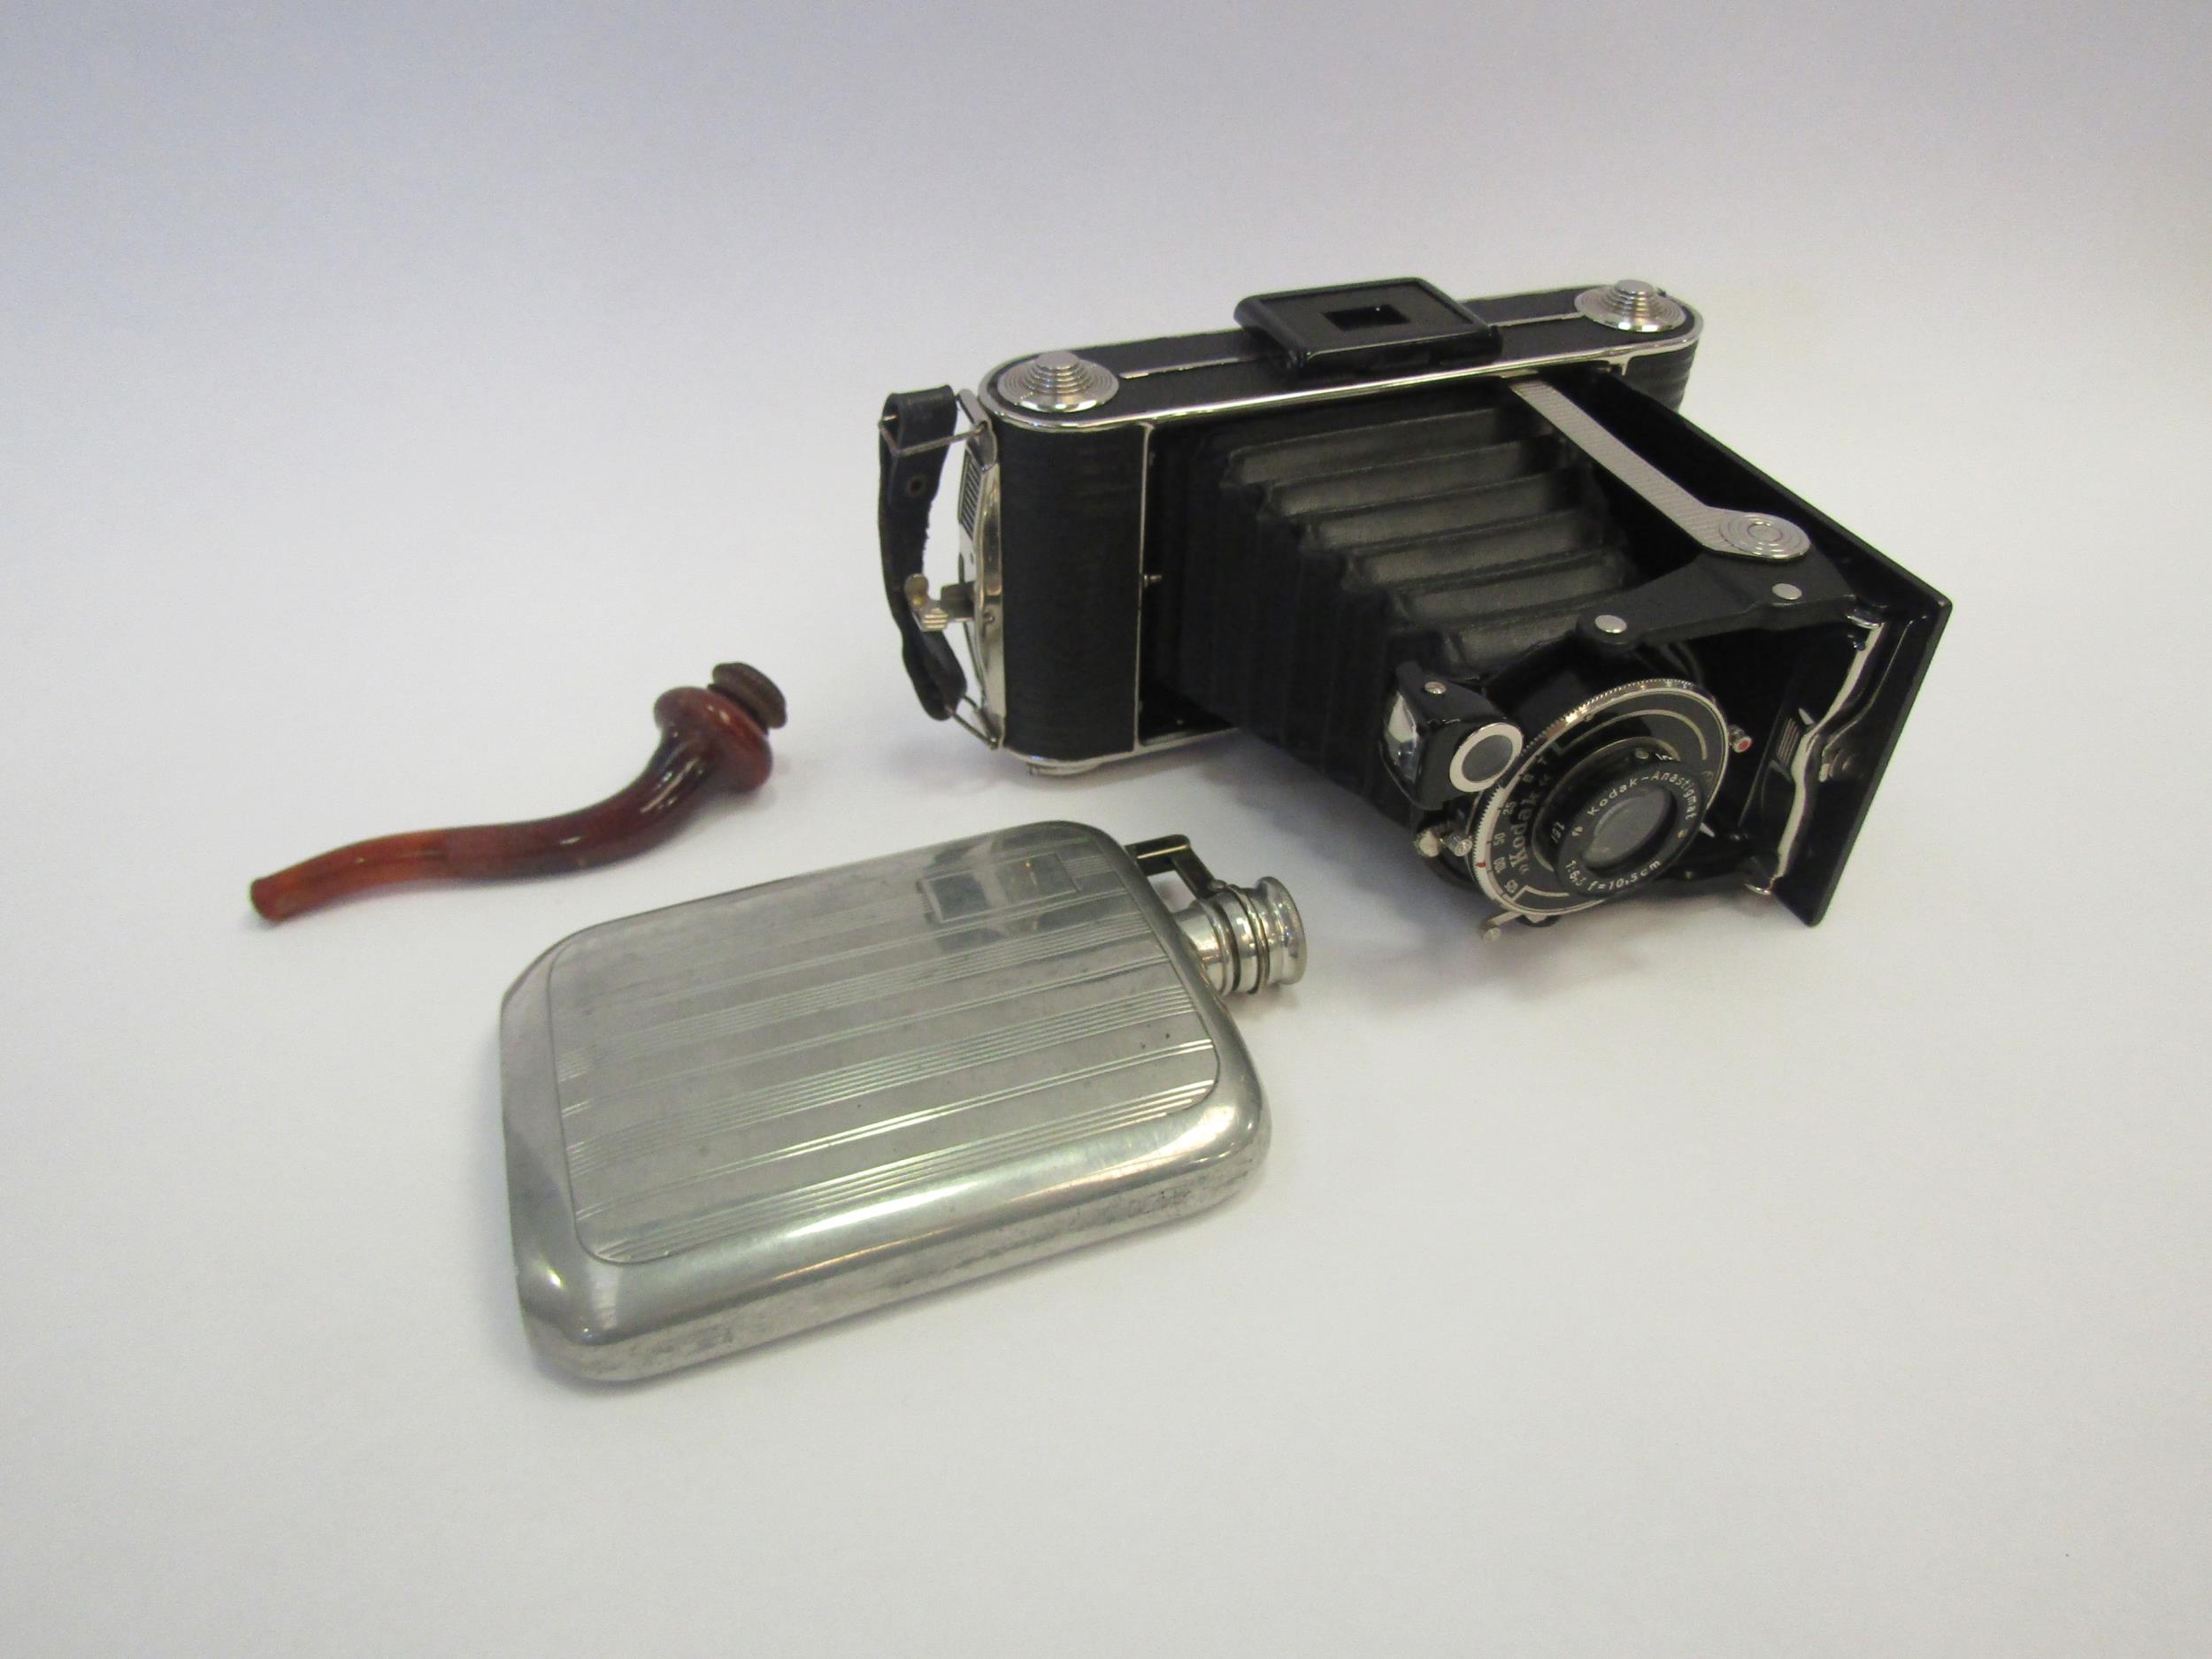 A cased Kodak Junior 620 camera, a 4oz hip flask and a cased pipe, possibly for opium